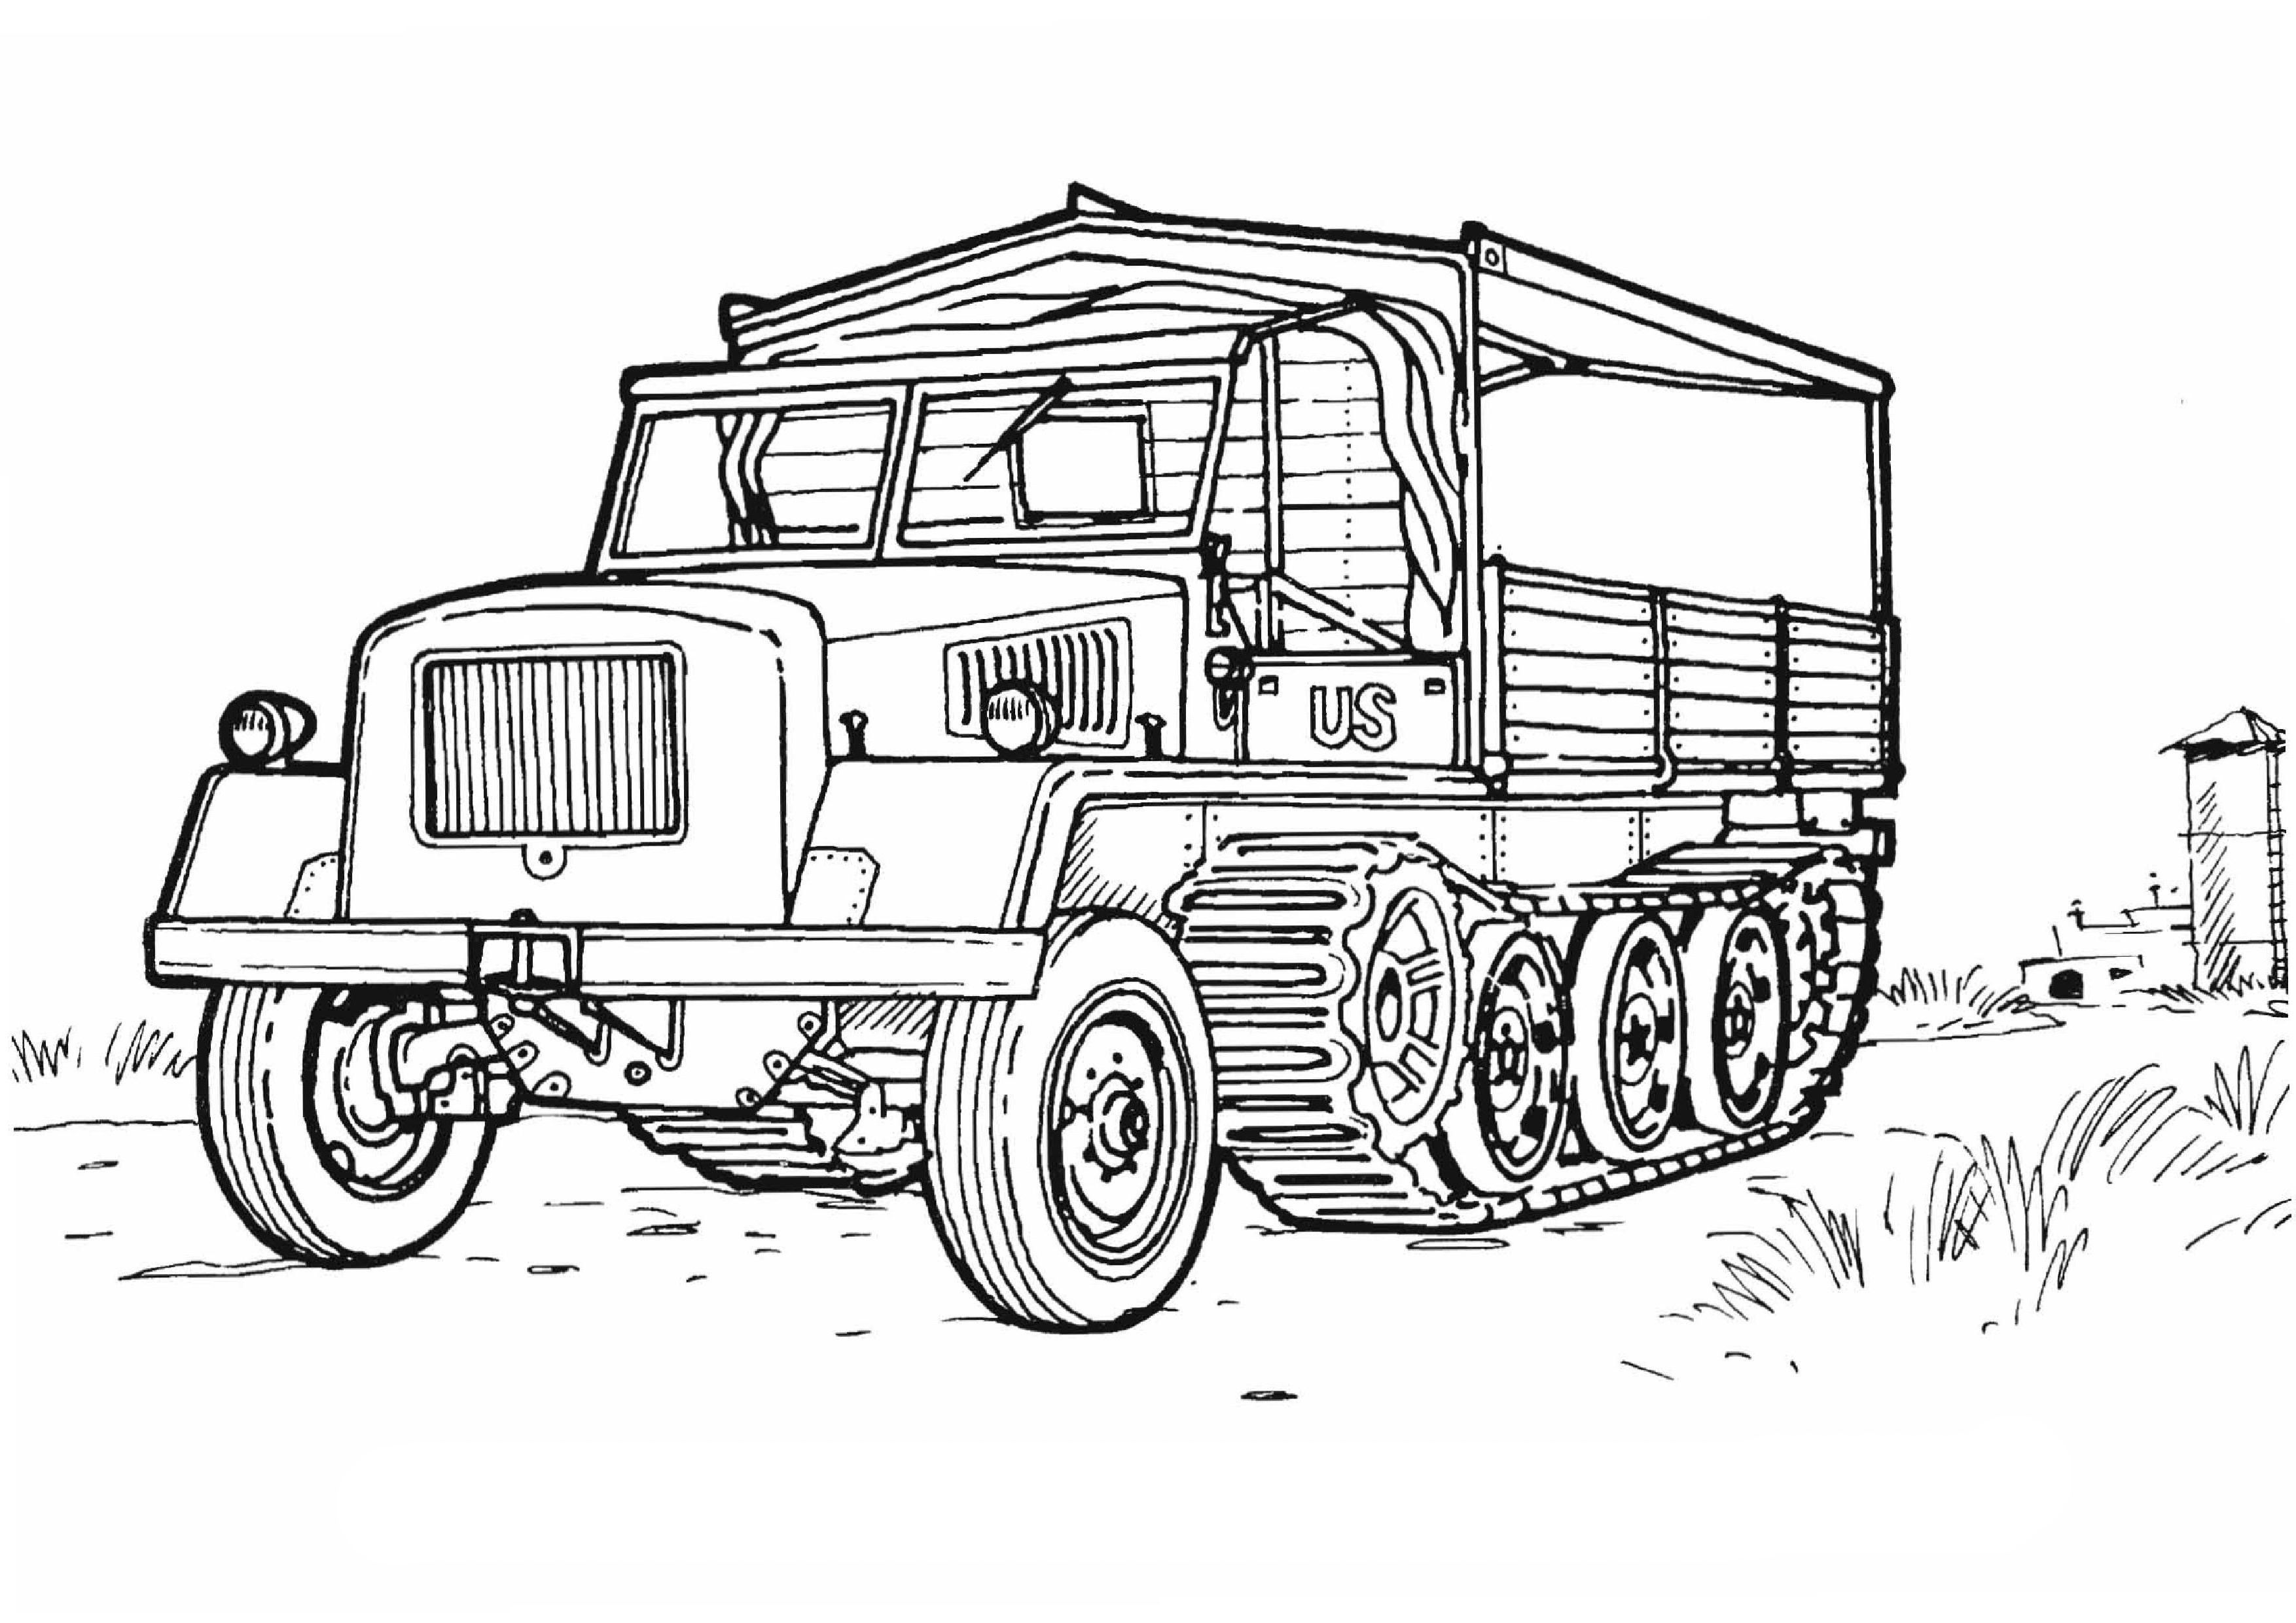 Printable Army Truck Coloring Pages Pdf - Free Army Truck Coloring Pages